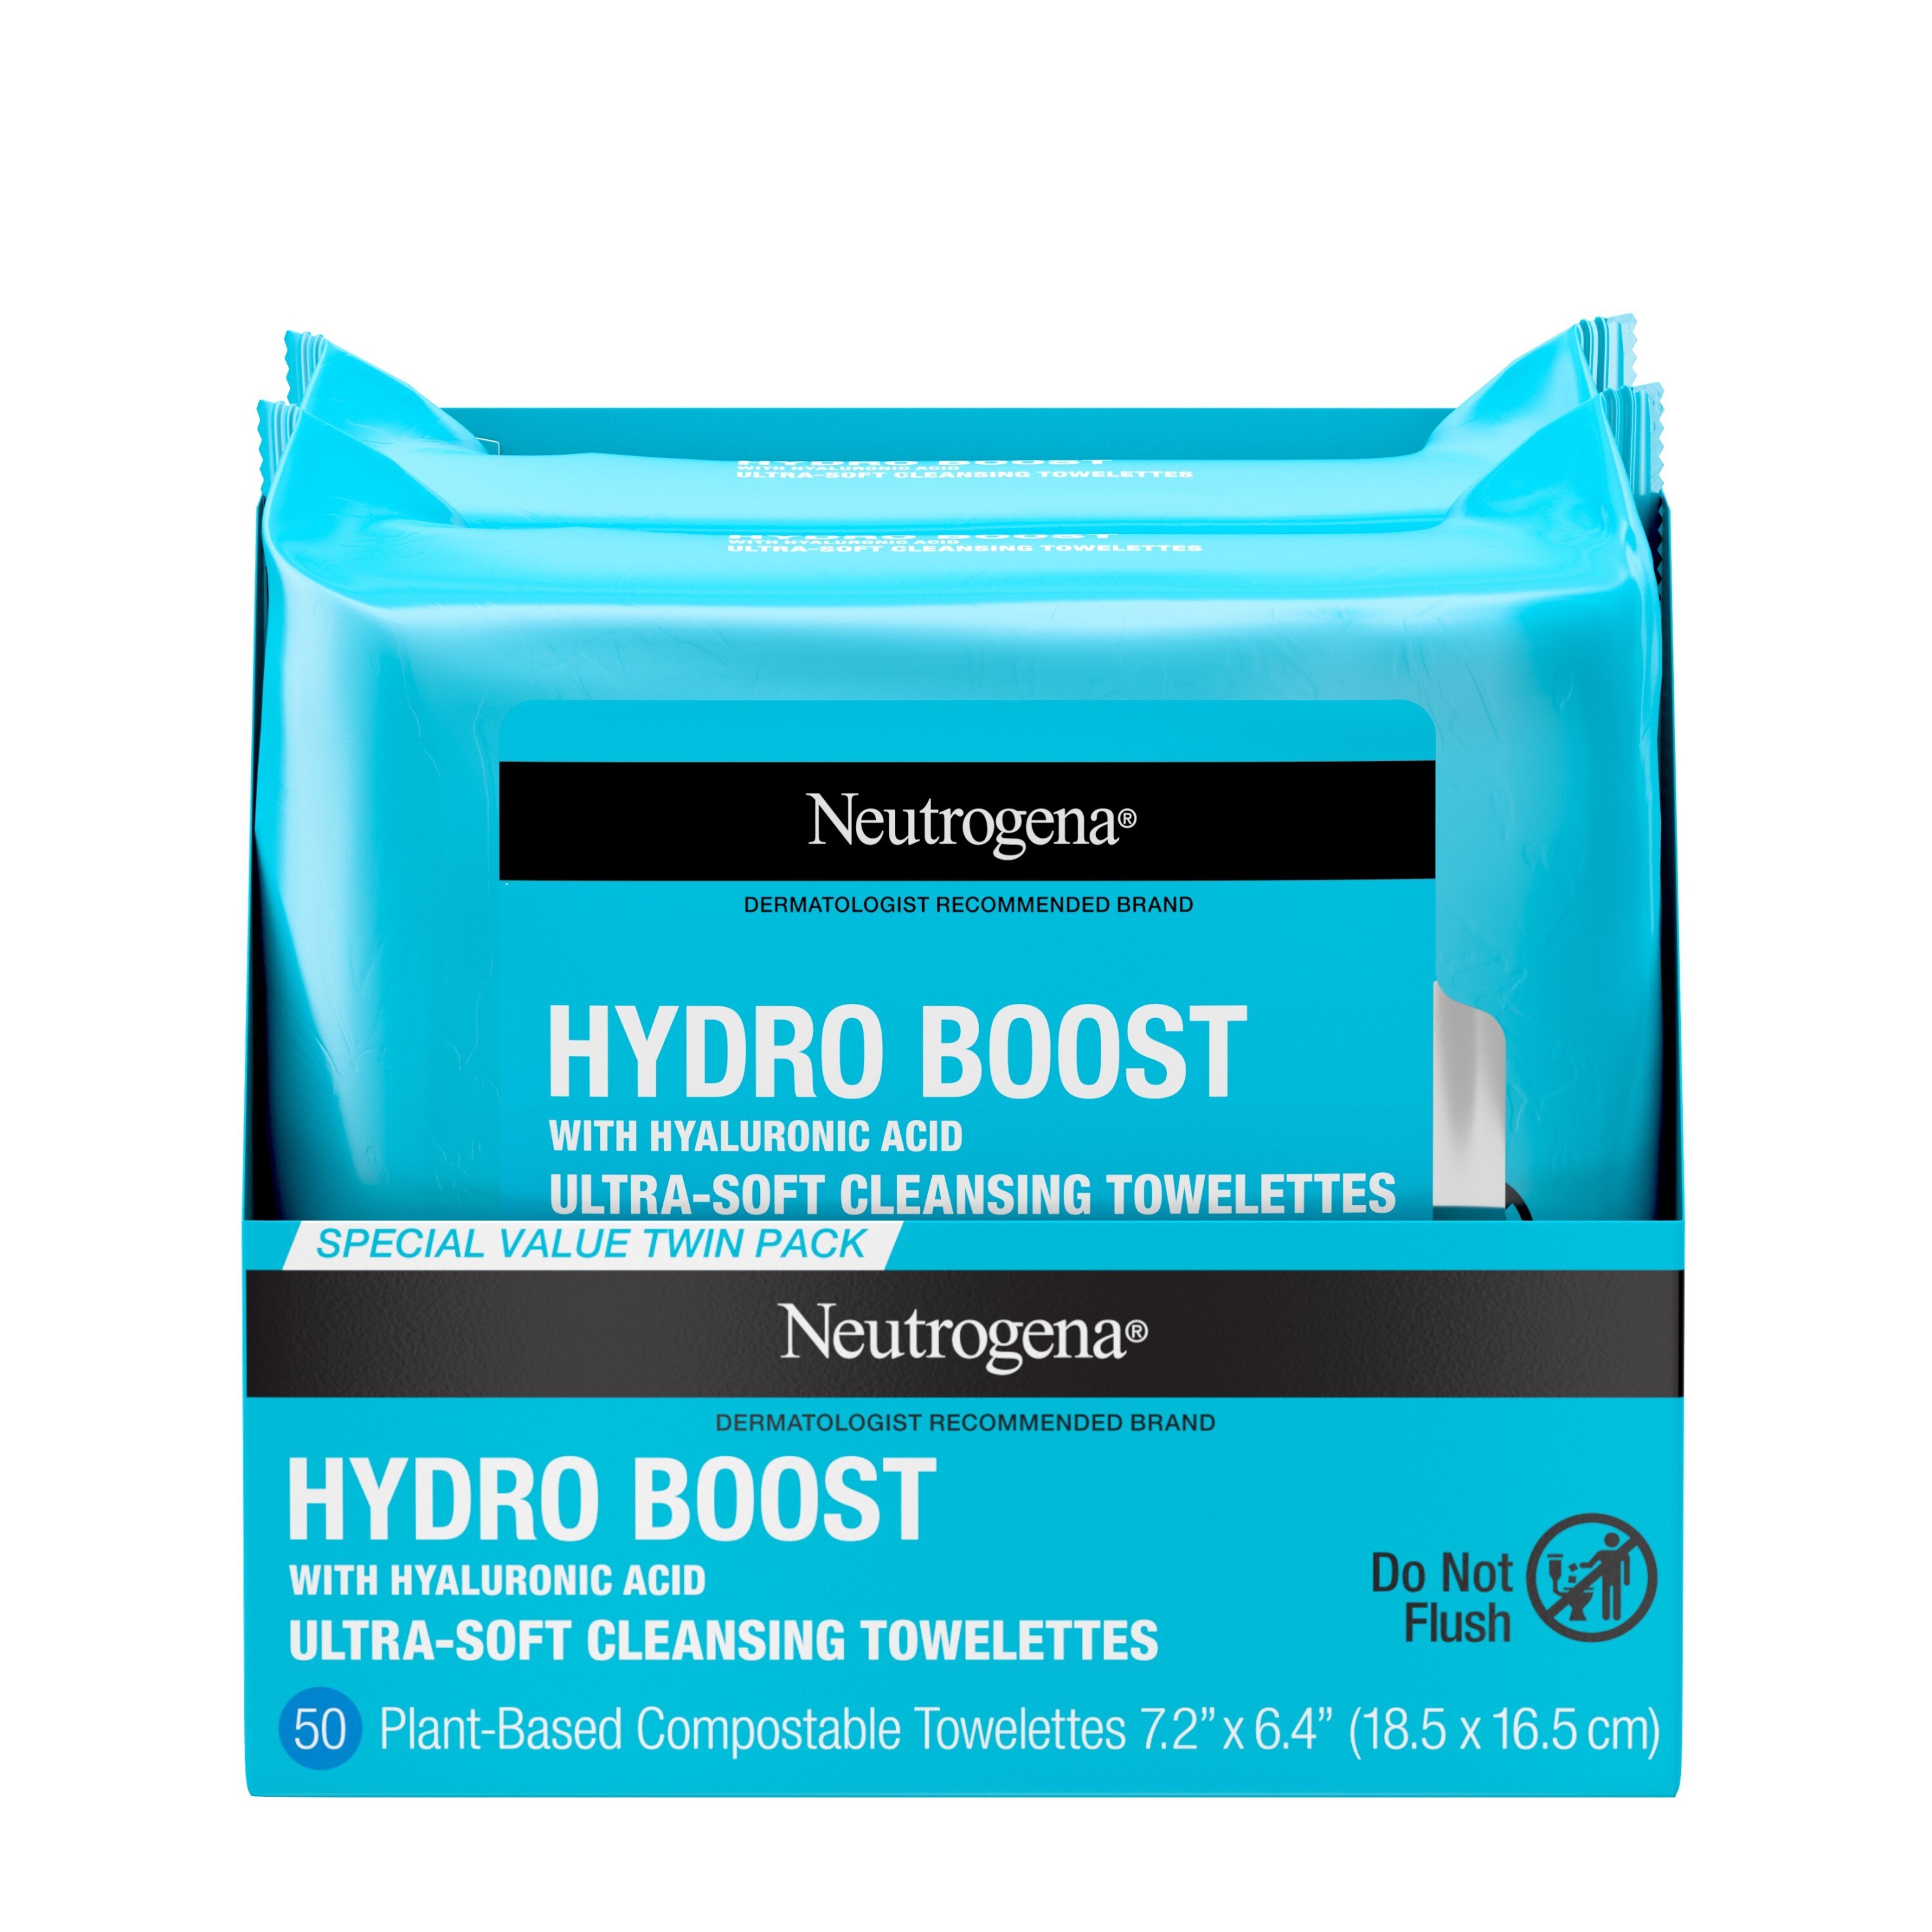 Neutrogena HydroBoost Face Cleansing & Makeup Remover Wipes, Twin Pack, 50CT